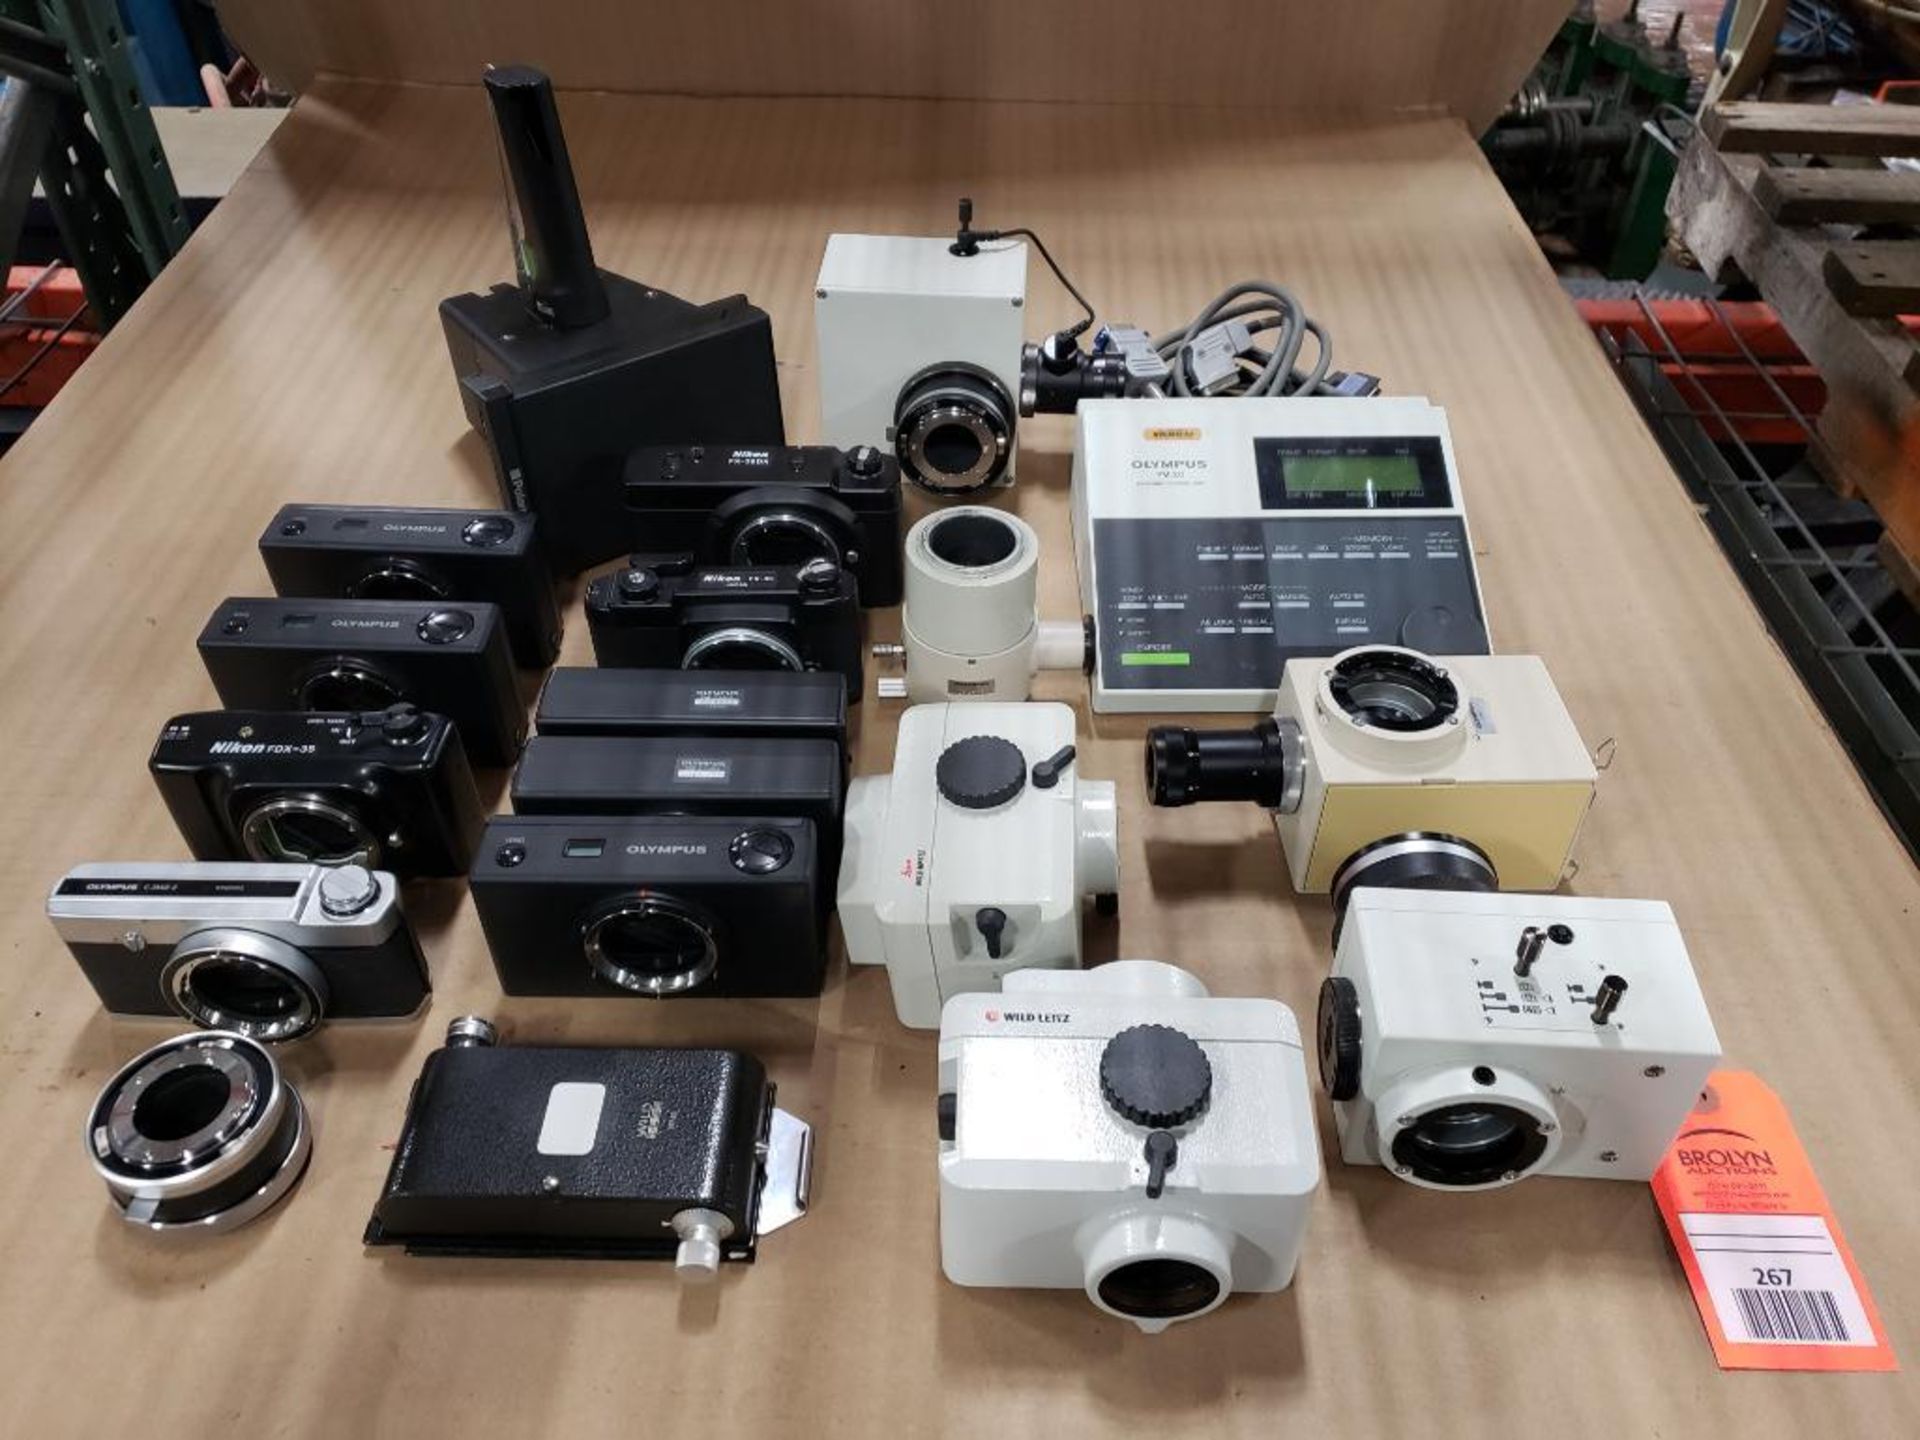 Assorted microscope cameras and accessories equipment.